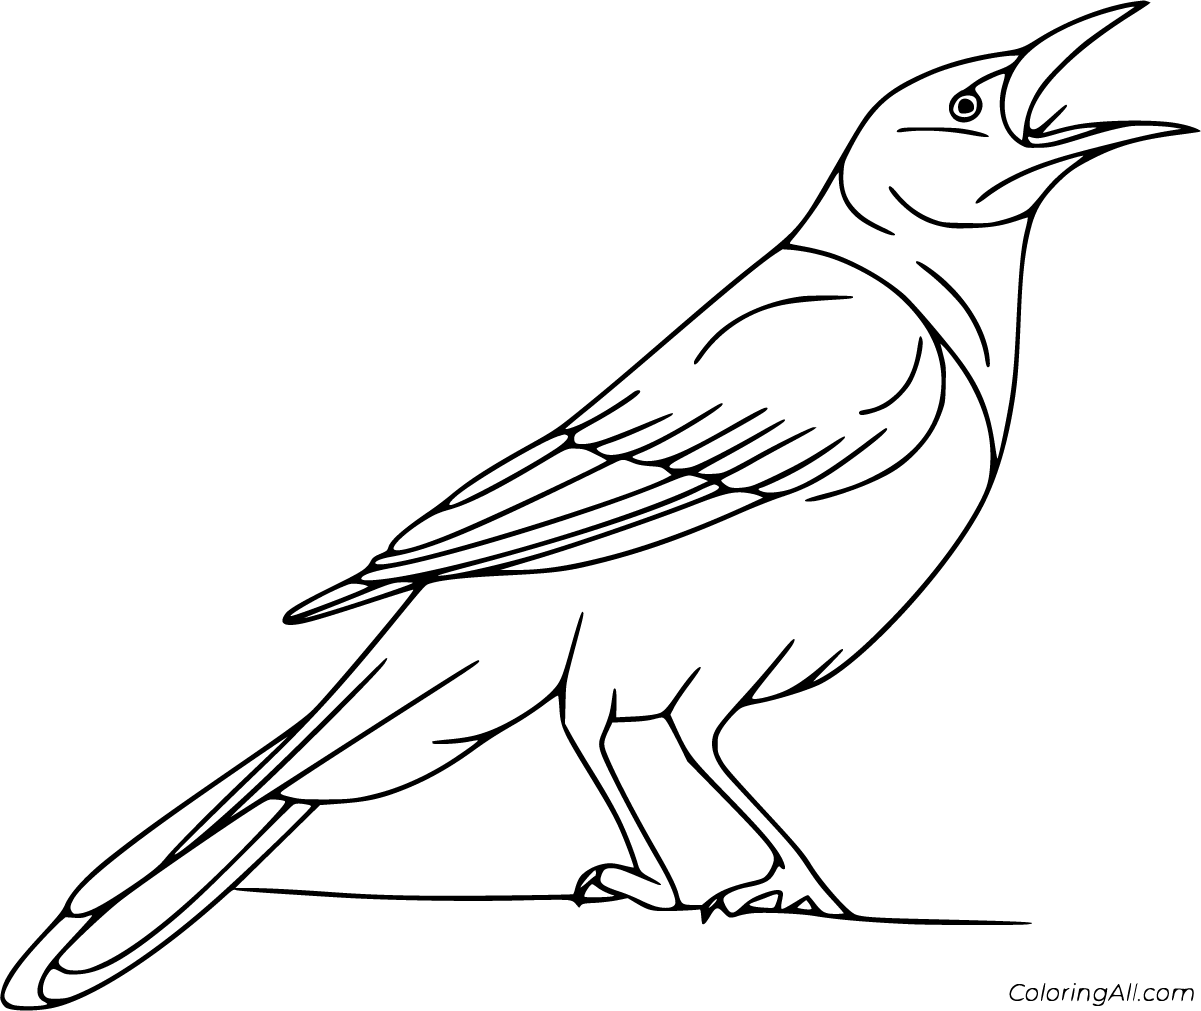  Crow Coloring Page for Kids